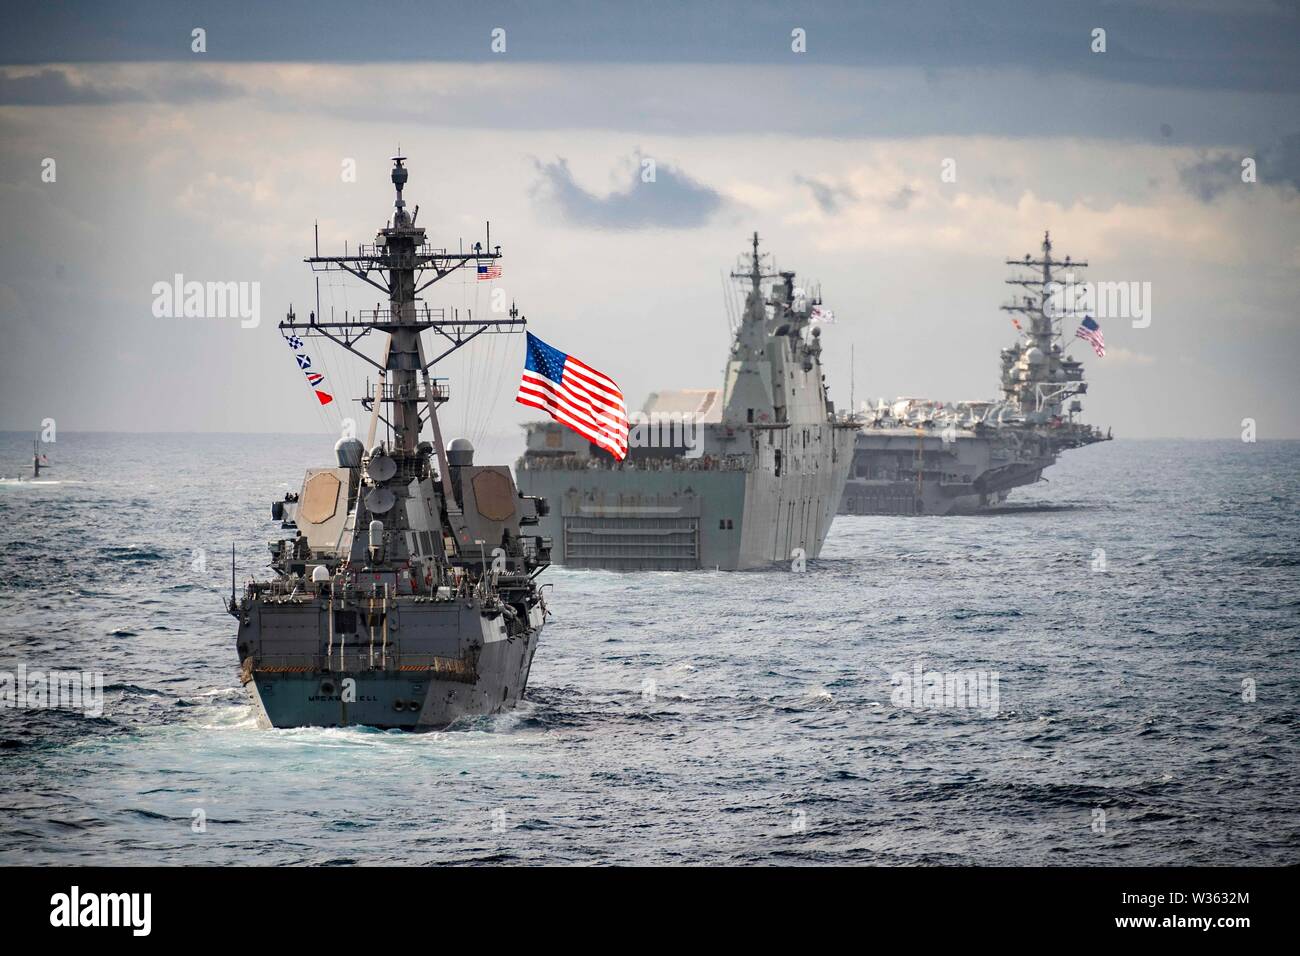 190711-N-WI365-1052 TASMAN SEA (July 11, 2019) – The amphibious dock landing ship USS Ashland (LSD 48) sails in formation behind the Arleigh Burke-class guided-missile destroyer USS McCampbell (DDG 85), center, the Royal Australian Navy Canberra-class landing helicopter dock HMAS Canberra (L02), left, the U.S. Navy Los Angeles-class submarine attack USS Key West (SSN 722), far left, and the U.S. Navy’s Nimitz-class aircraft carrier USS Ronald Reagan (CVN 76), during Talisman Sabre 2019. Ashland, part of the Wasp Amphibious Ready Group, with embarked 31st Marine Expeditionary Unit, is currently Stock Photo